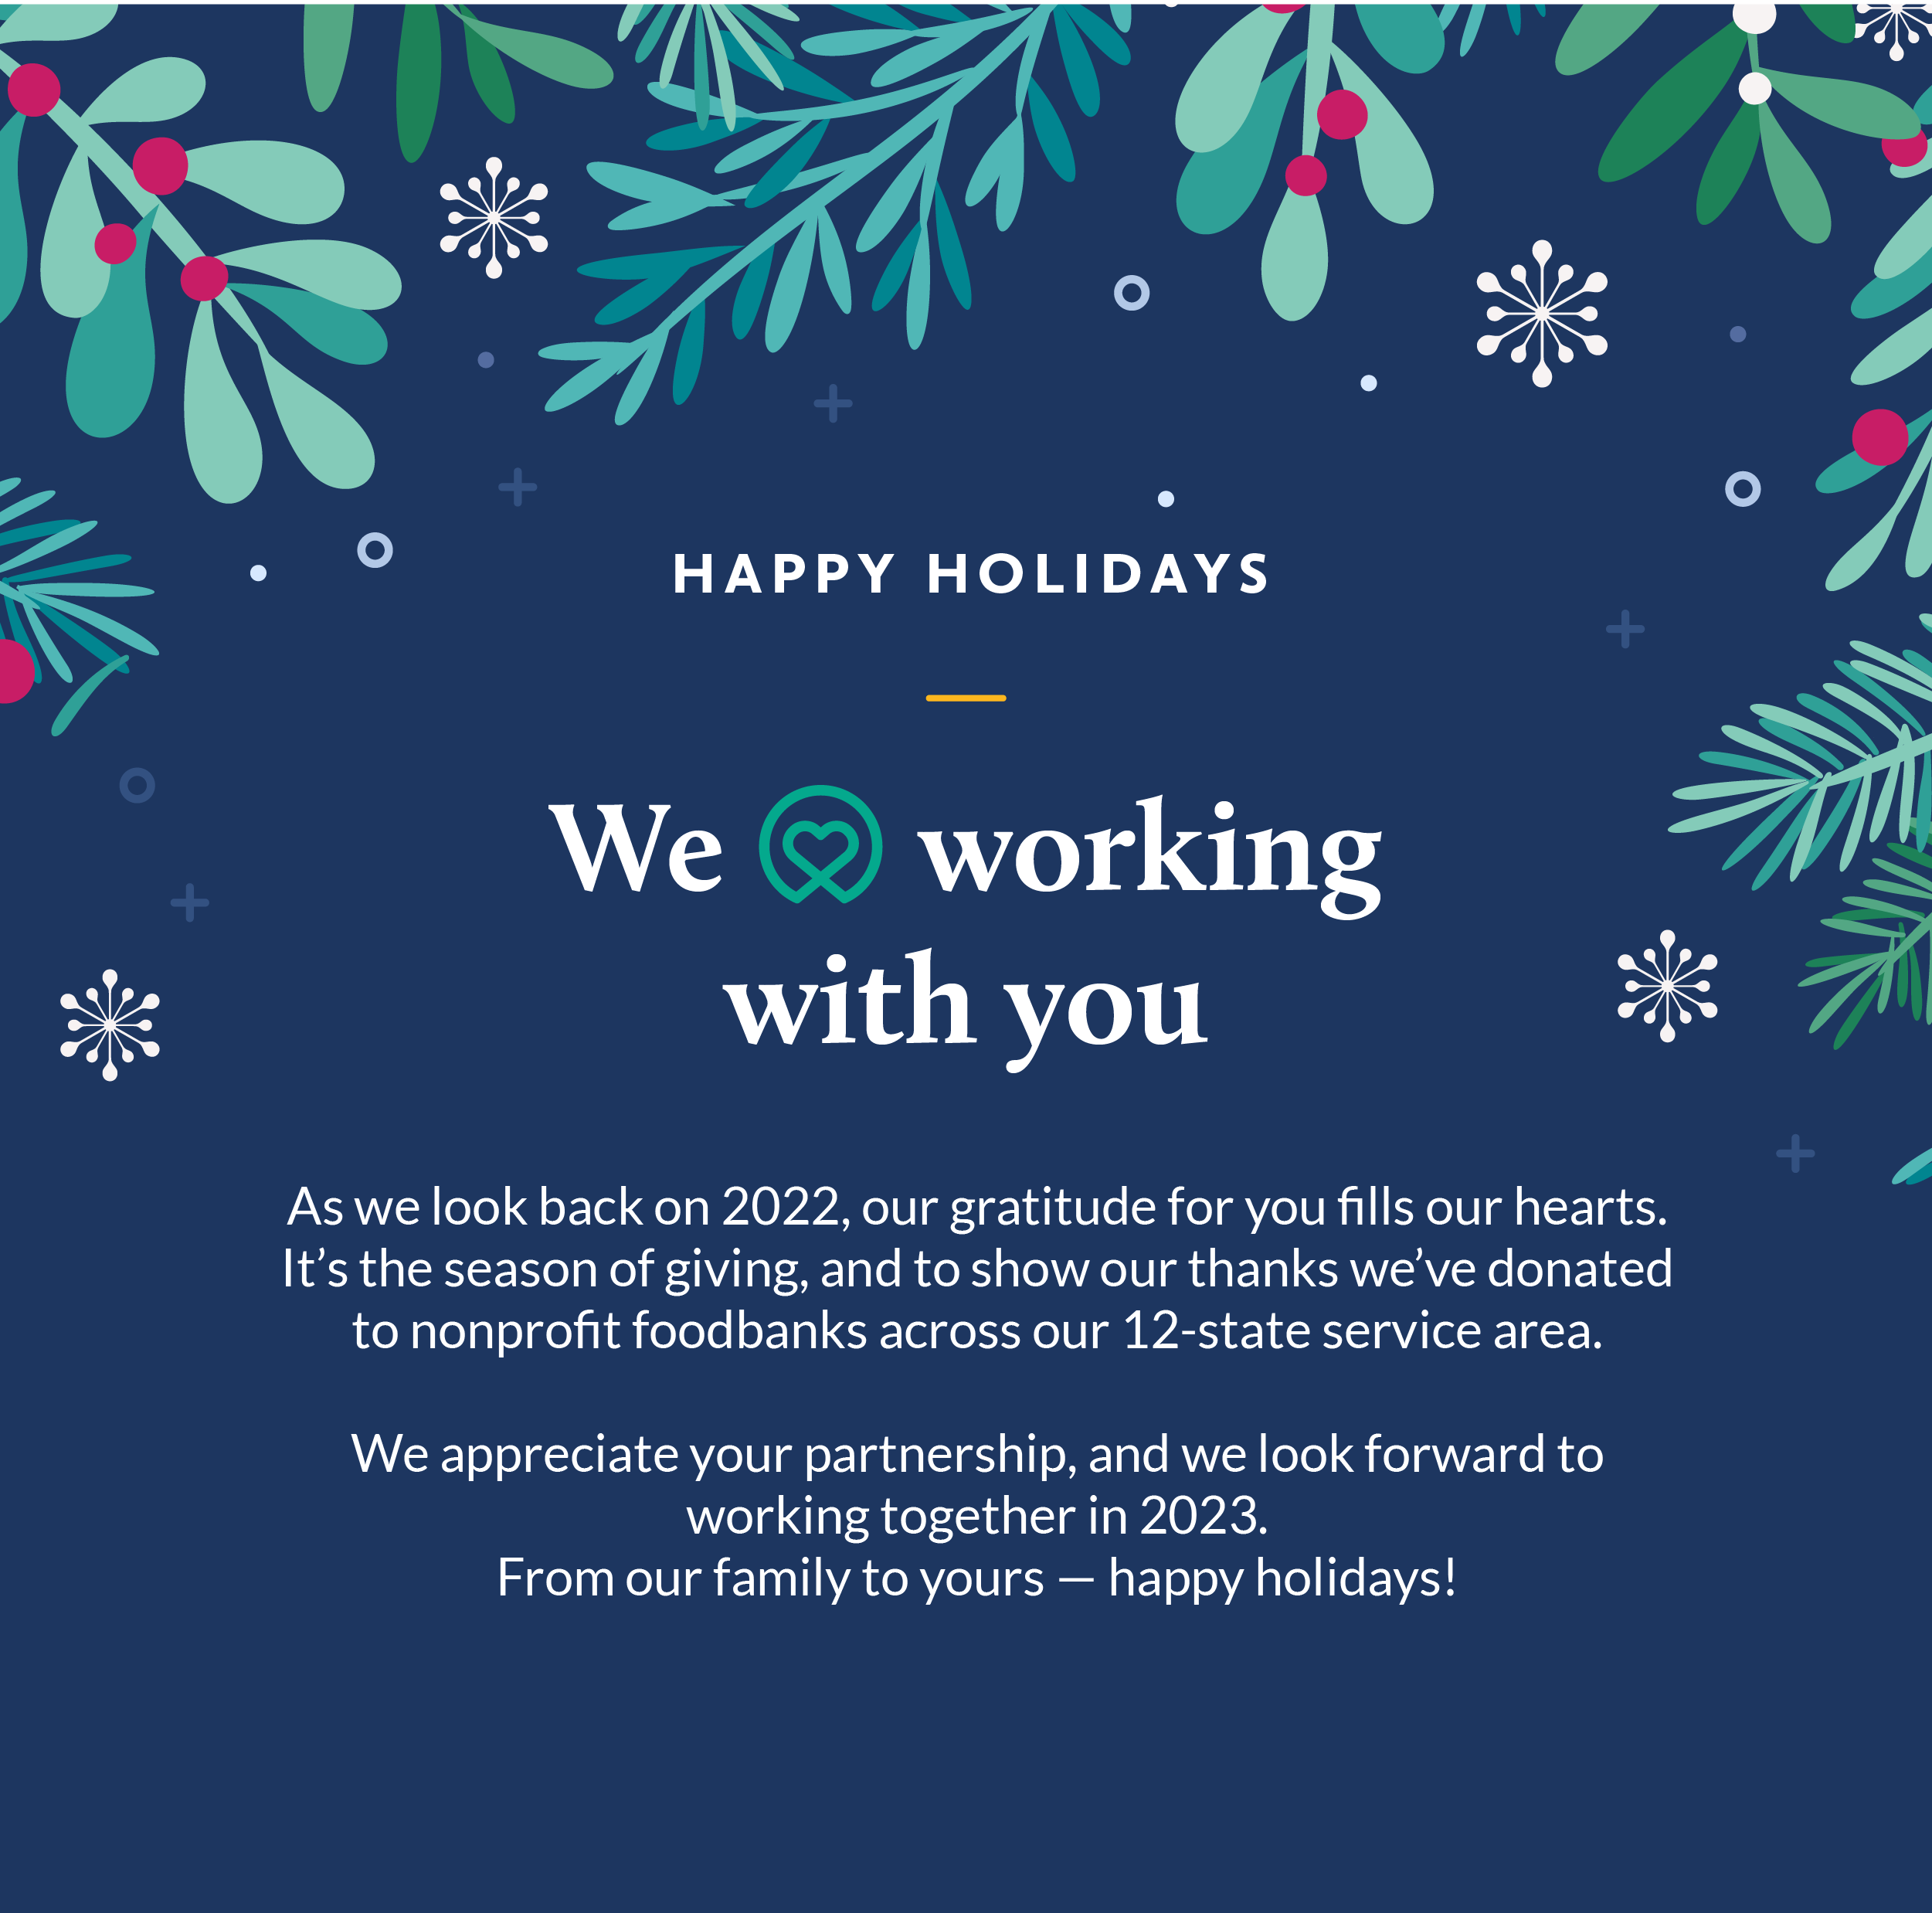 Medica | HAPPY HOLIDAYS - We Love working with you